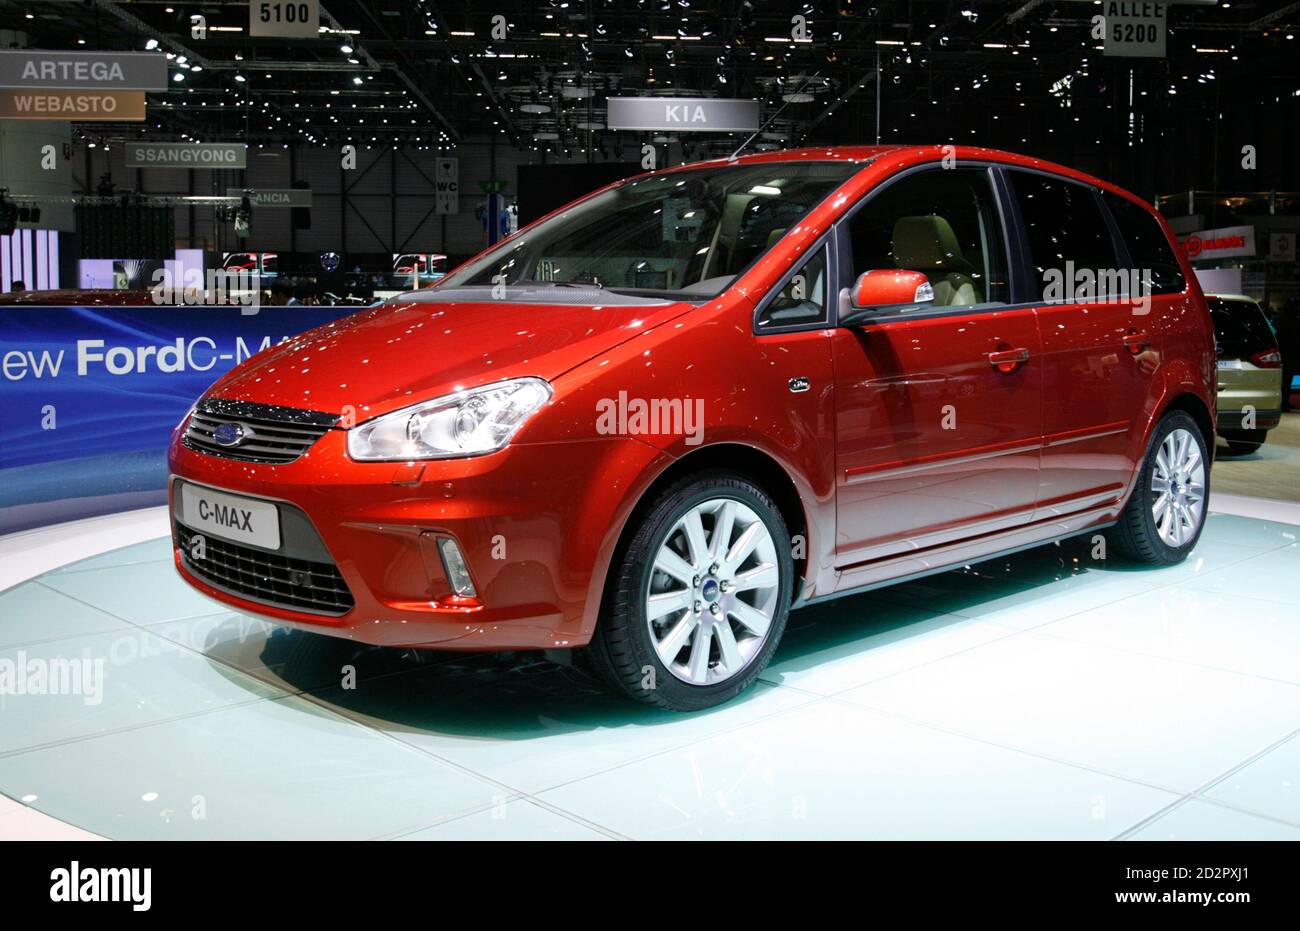 Page 3 - Ford C Max High Resolution Stock Photography and Images - Alamy